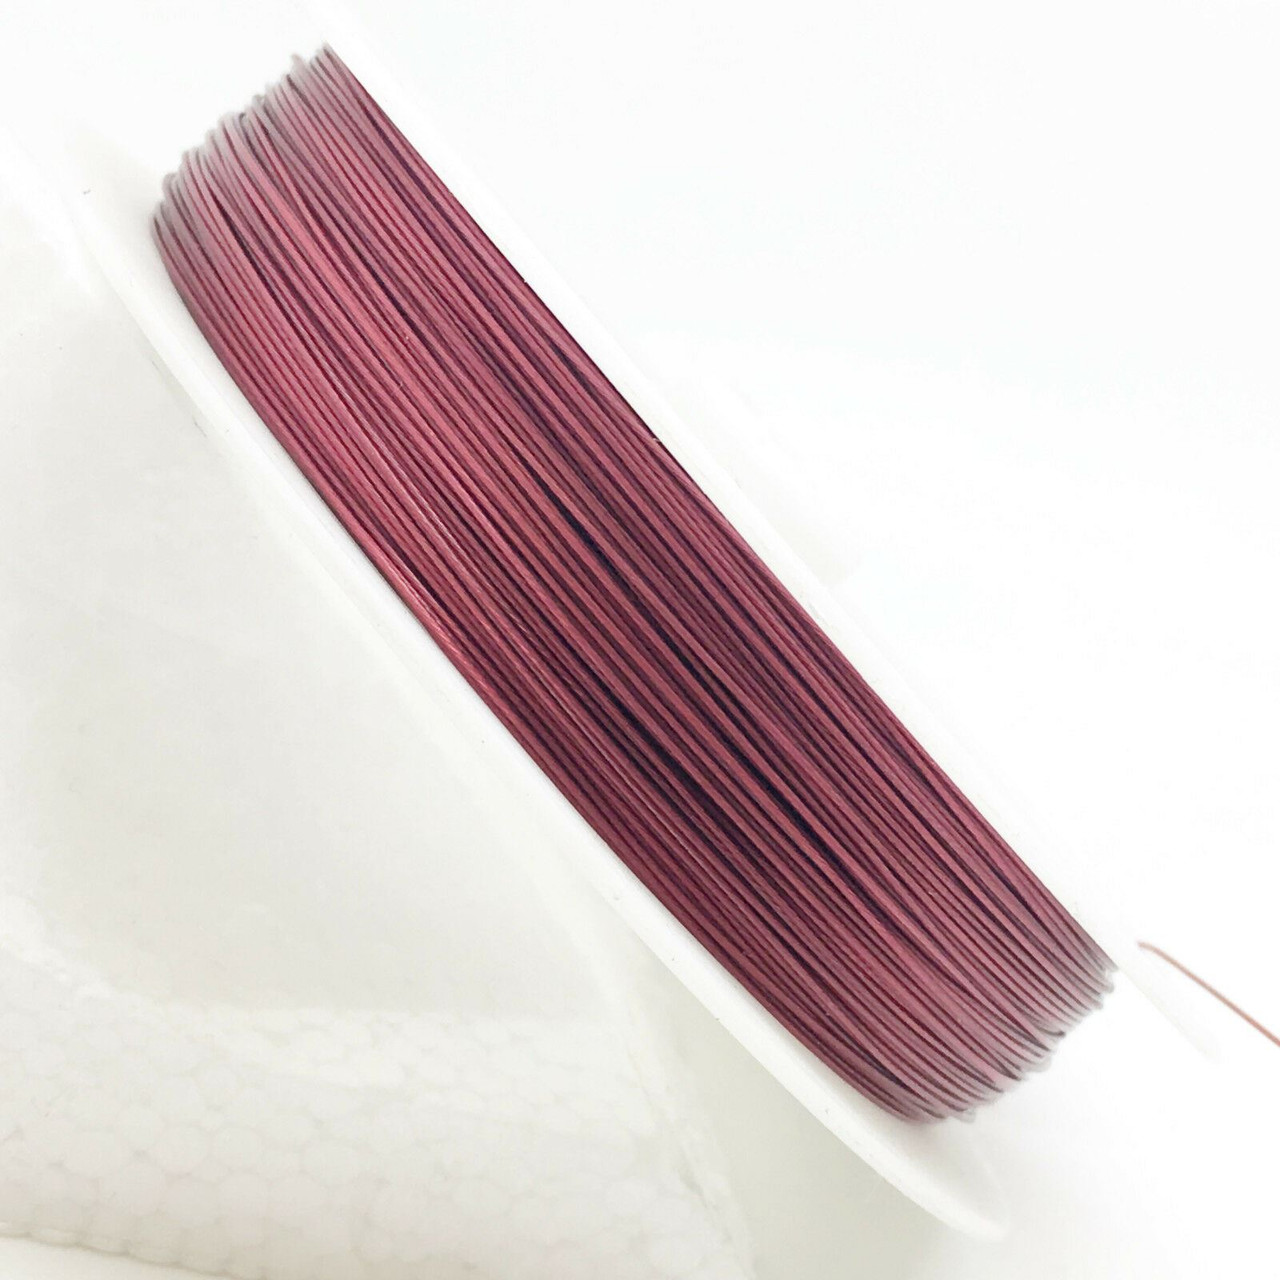 50m roll Tiger Tail - Raspberry - 0.38mm thick